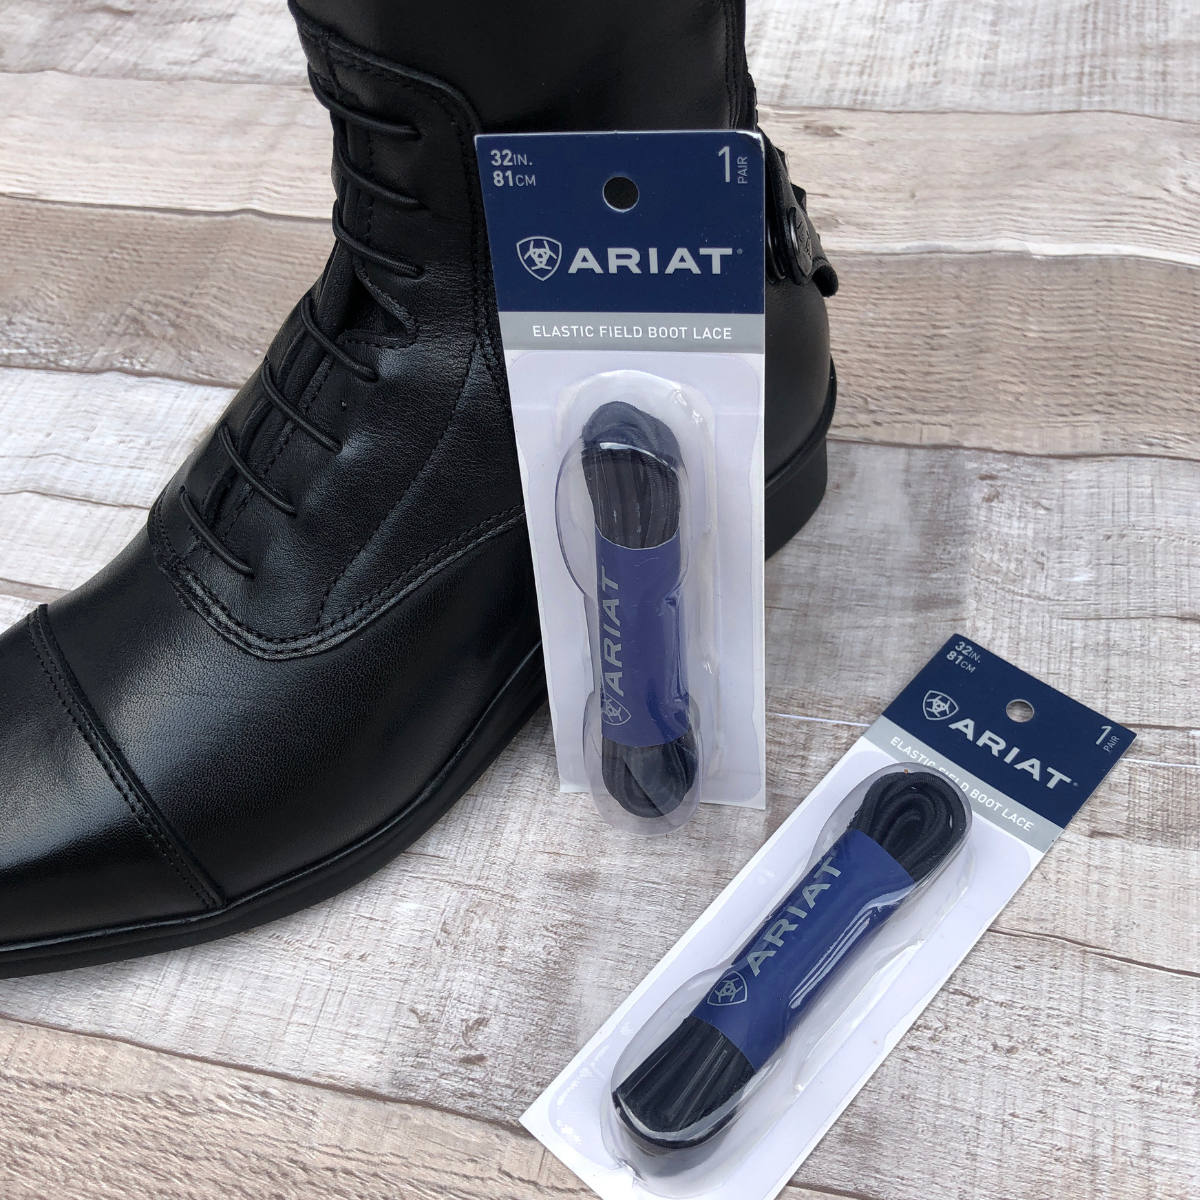 Ariat Replacement Elastic Field Laces